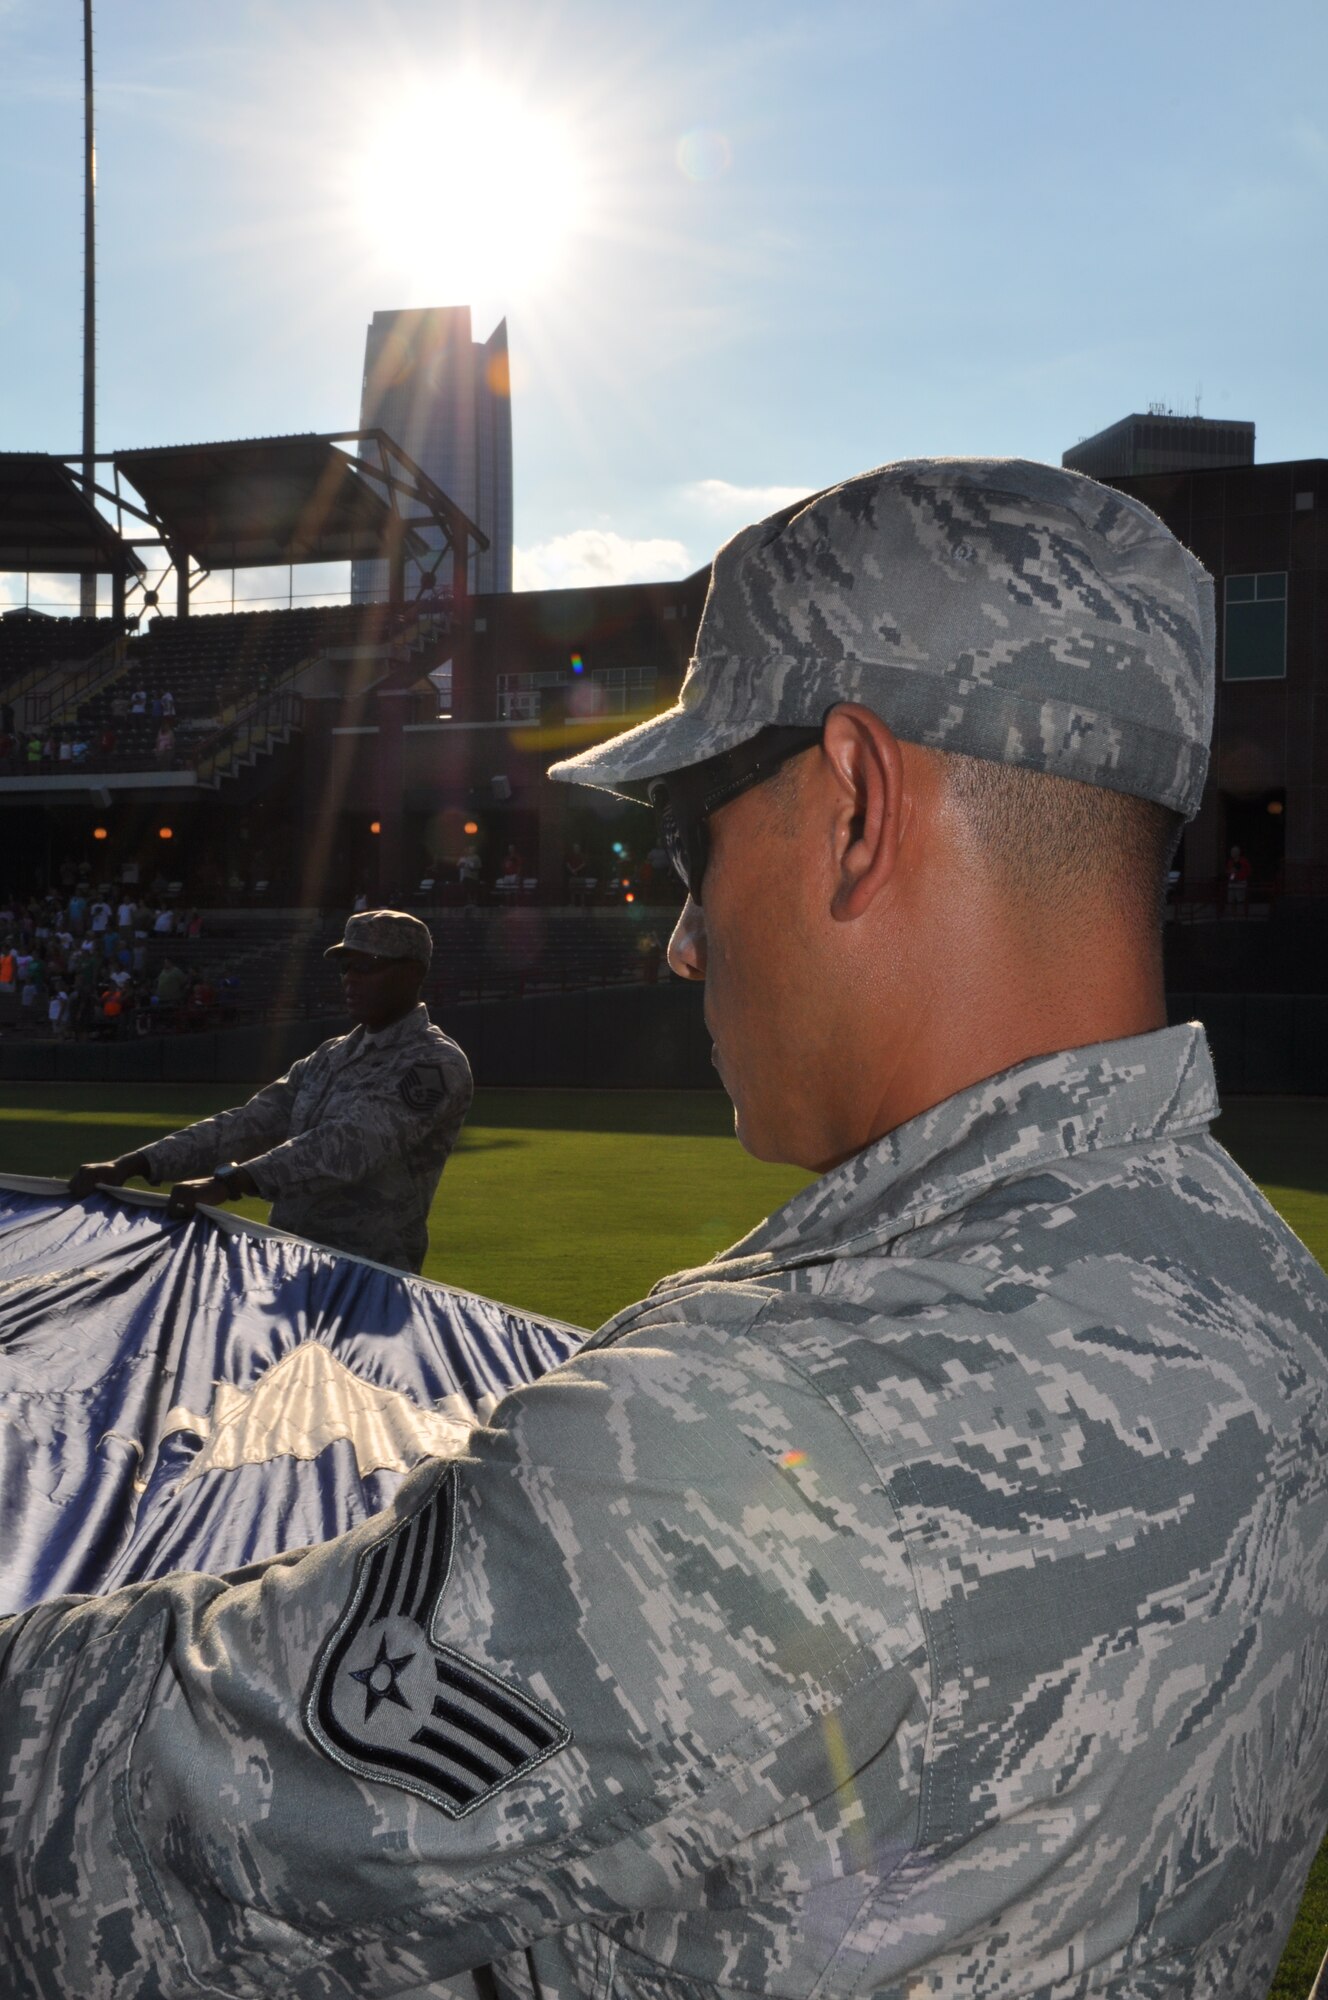 Staff Sgt. Homero Morales-Arellano, 72nd Comptroller Squadron along with 50 other members of Team Tinker, hold a huge U.S. flag during the national anthem at the opening of the Oklahoma City RedHawks military appreciation game on July 27.  Members of the 72nd Air Base Wing, 507th Air Refueling Wing, 552nd Air Control Wing, U.S. Navy Strategic Communications Wing One and the Air Logistics Center all volunteered to represent the military during the military appreciation game which included an oath of enlistment and special recognition of recently deployed Airmen. (U.S. Air Force Photo/Maj. Jon Quinlan)